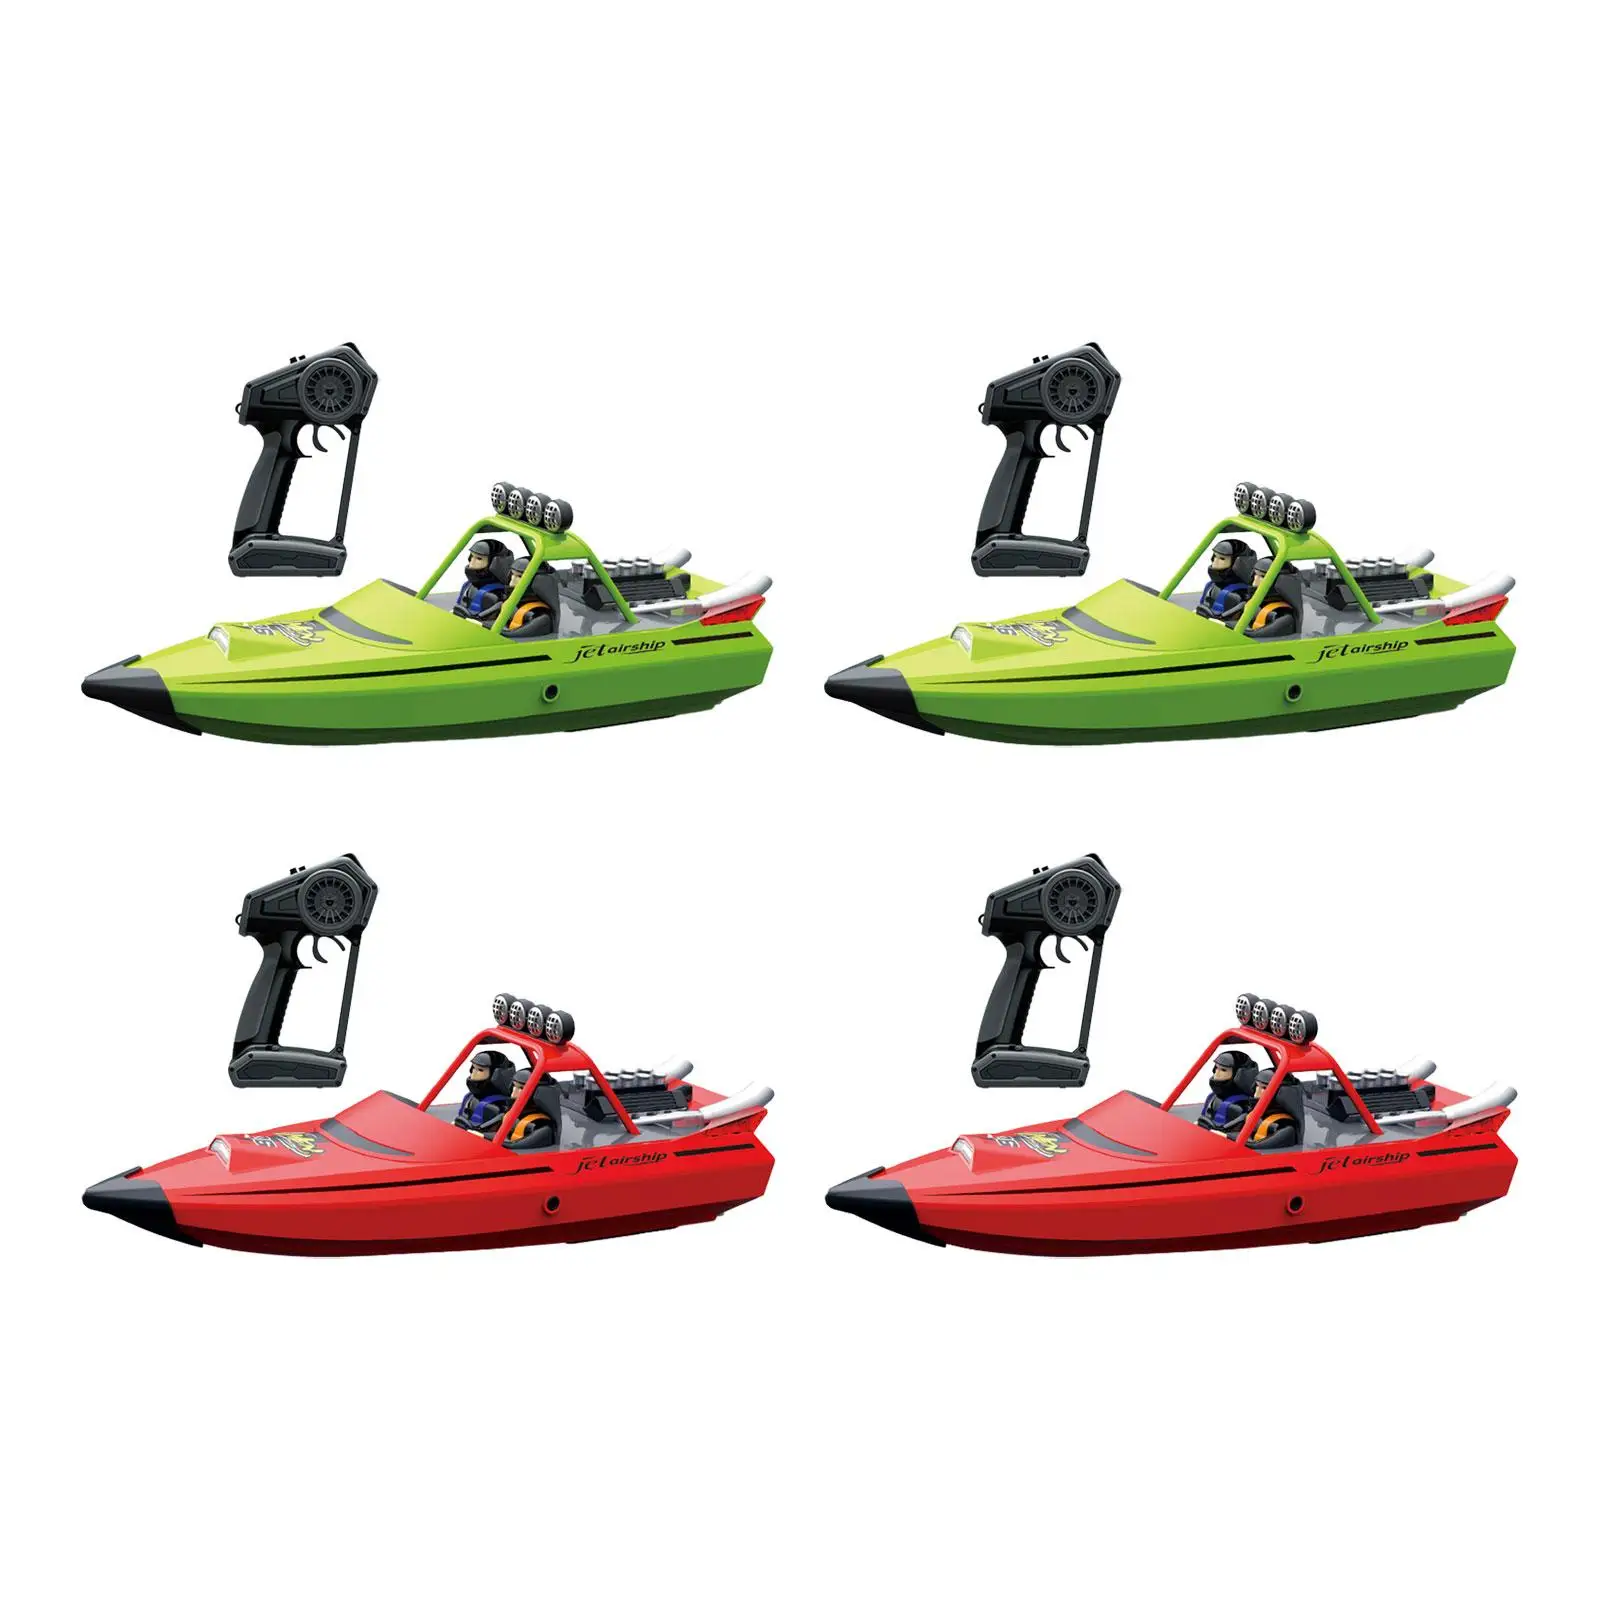 RC Boat Self Righting Racing Boat Outdoor Radio Controlled Watercraft for Kids Teens Pools and Lakes Adults River Water Play